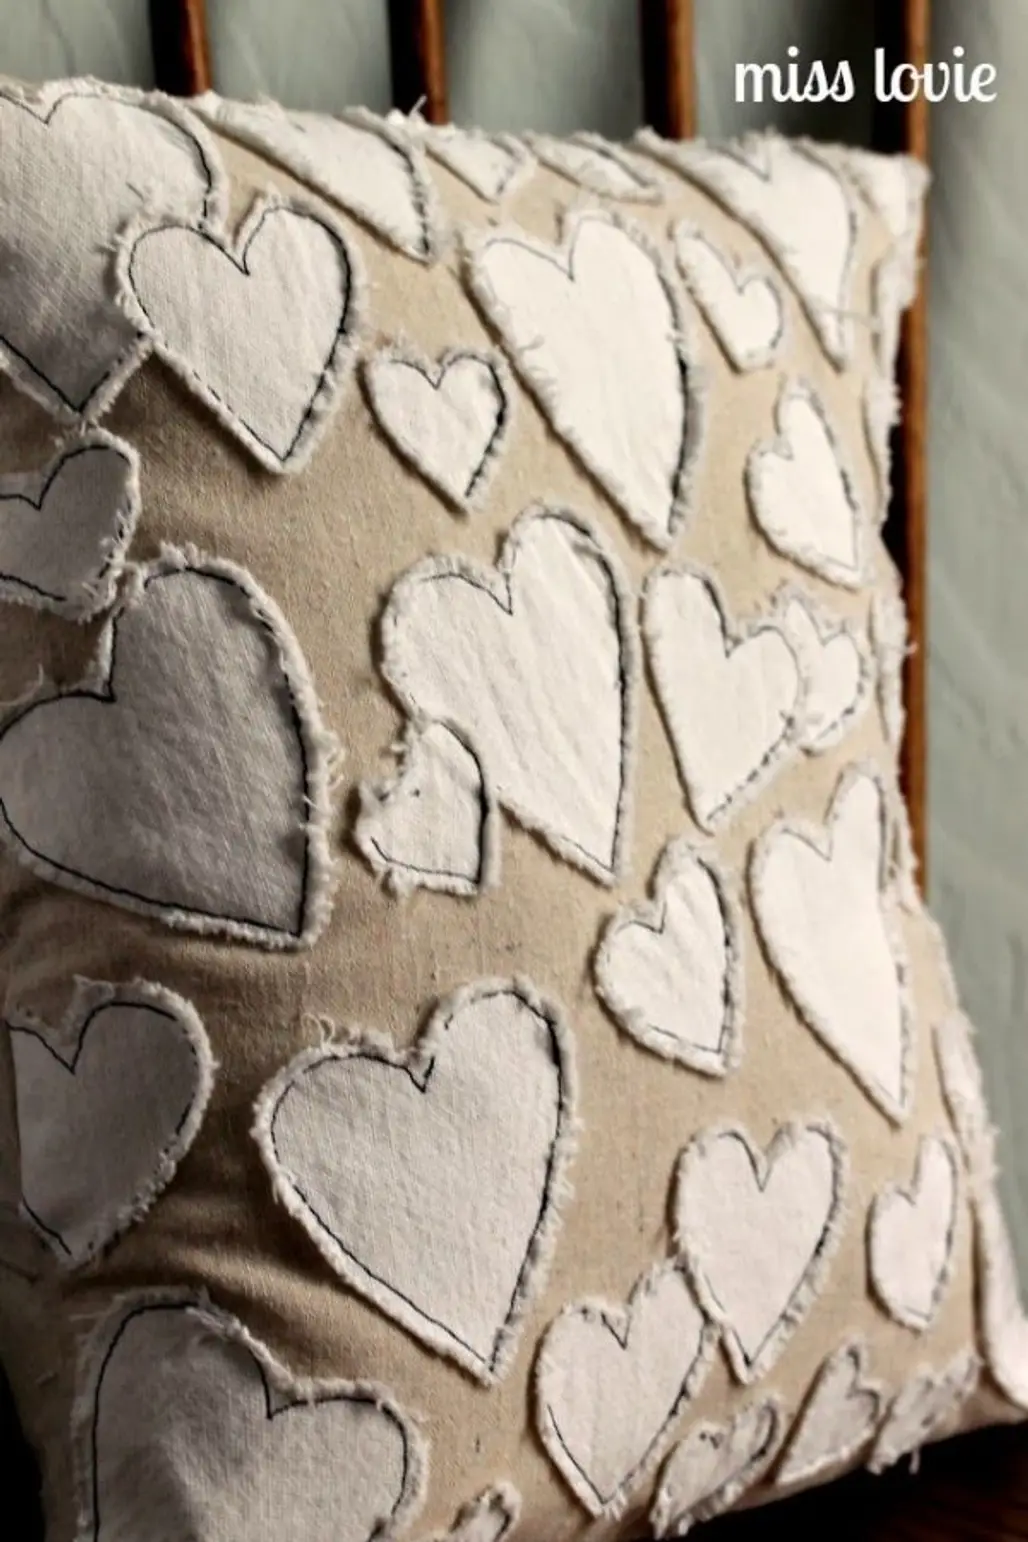 Anthro Knockoff Heart Collector Pillow